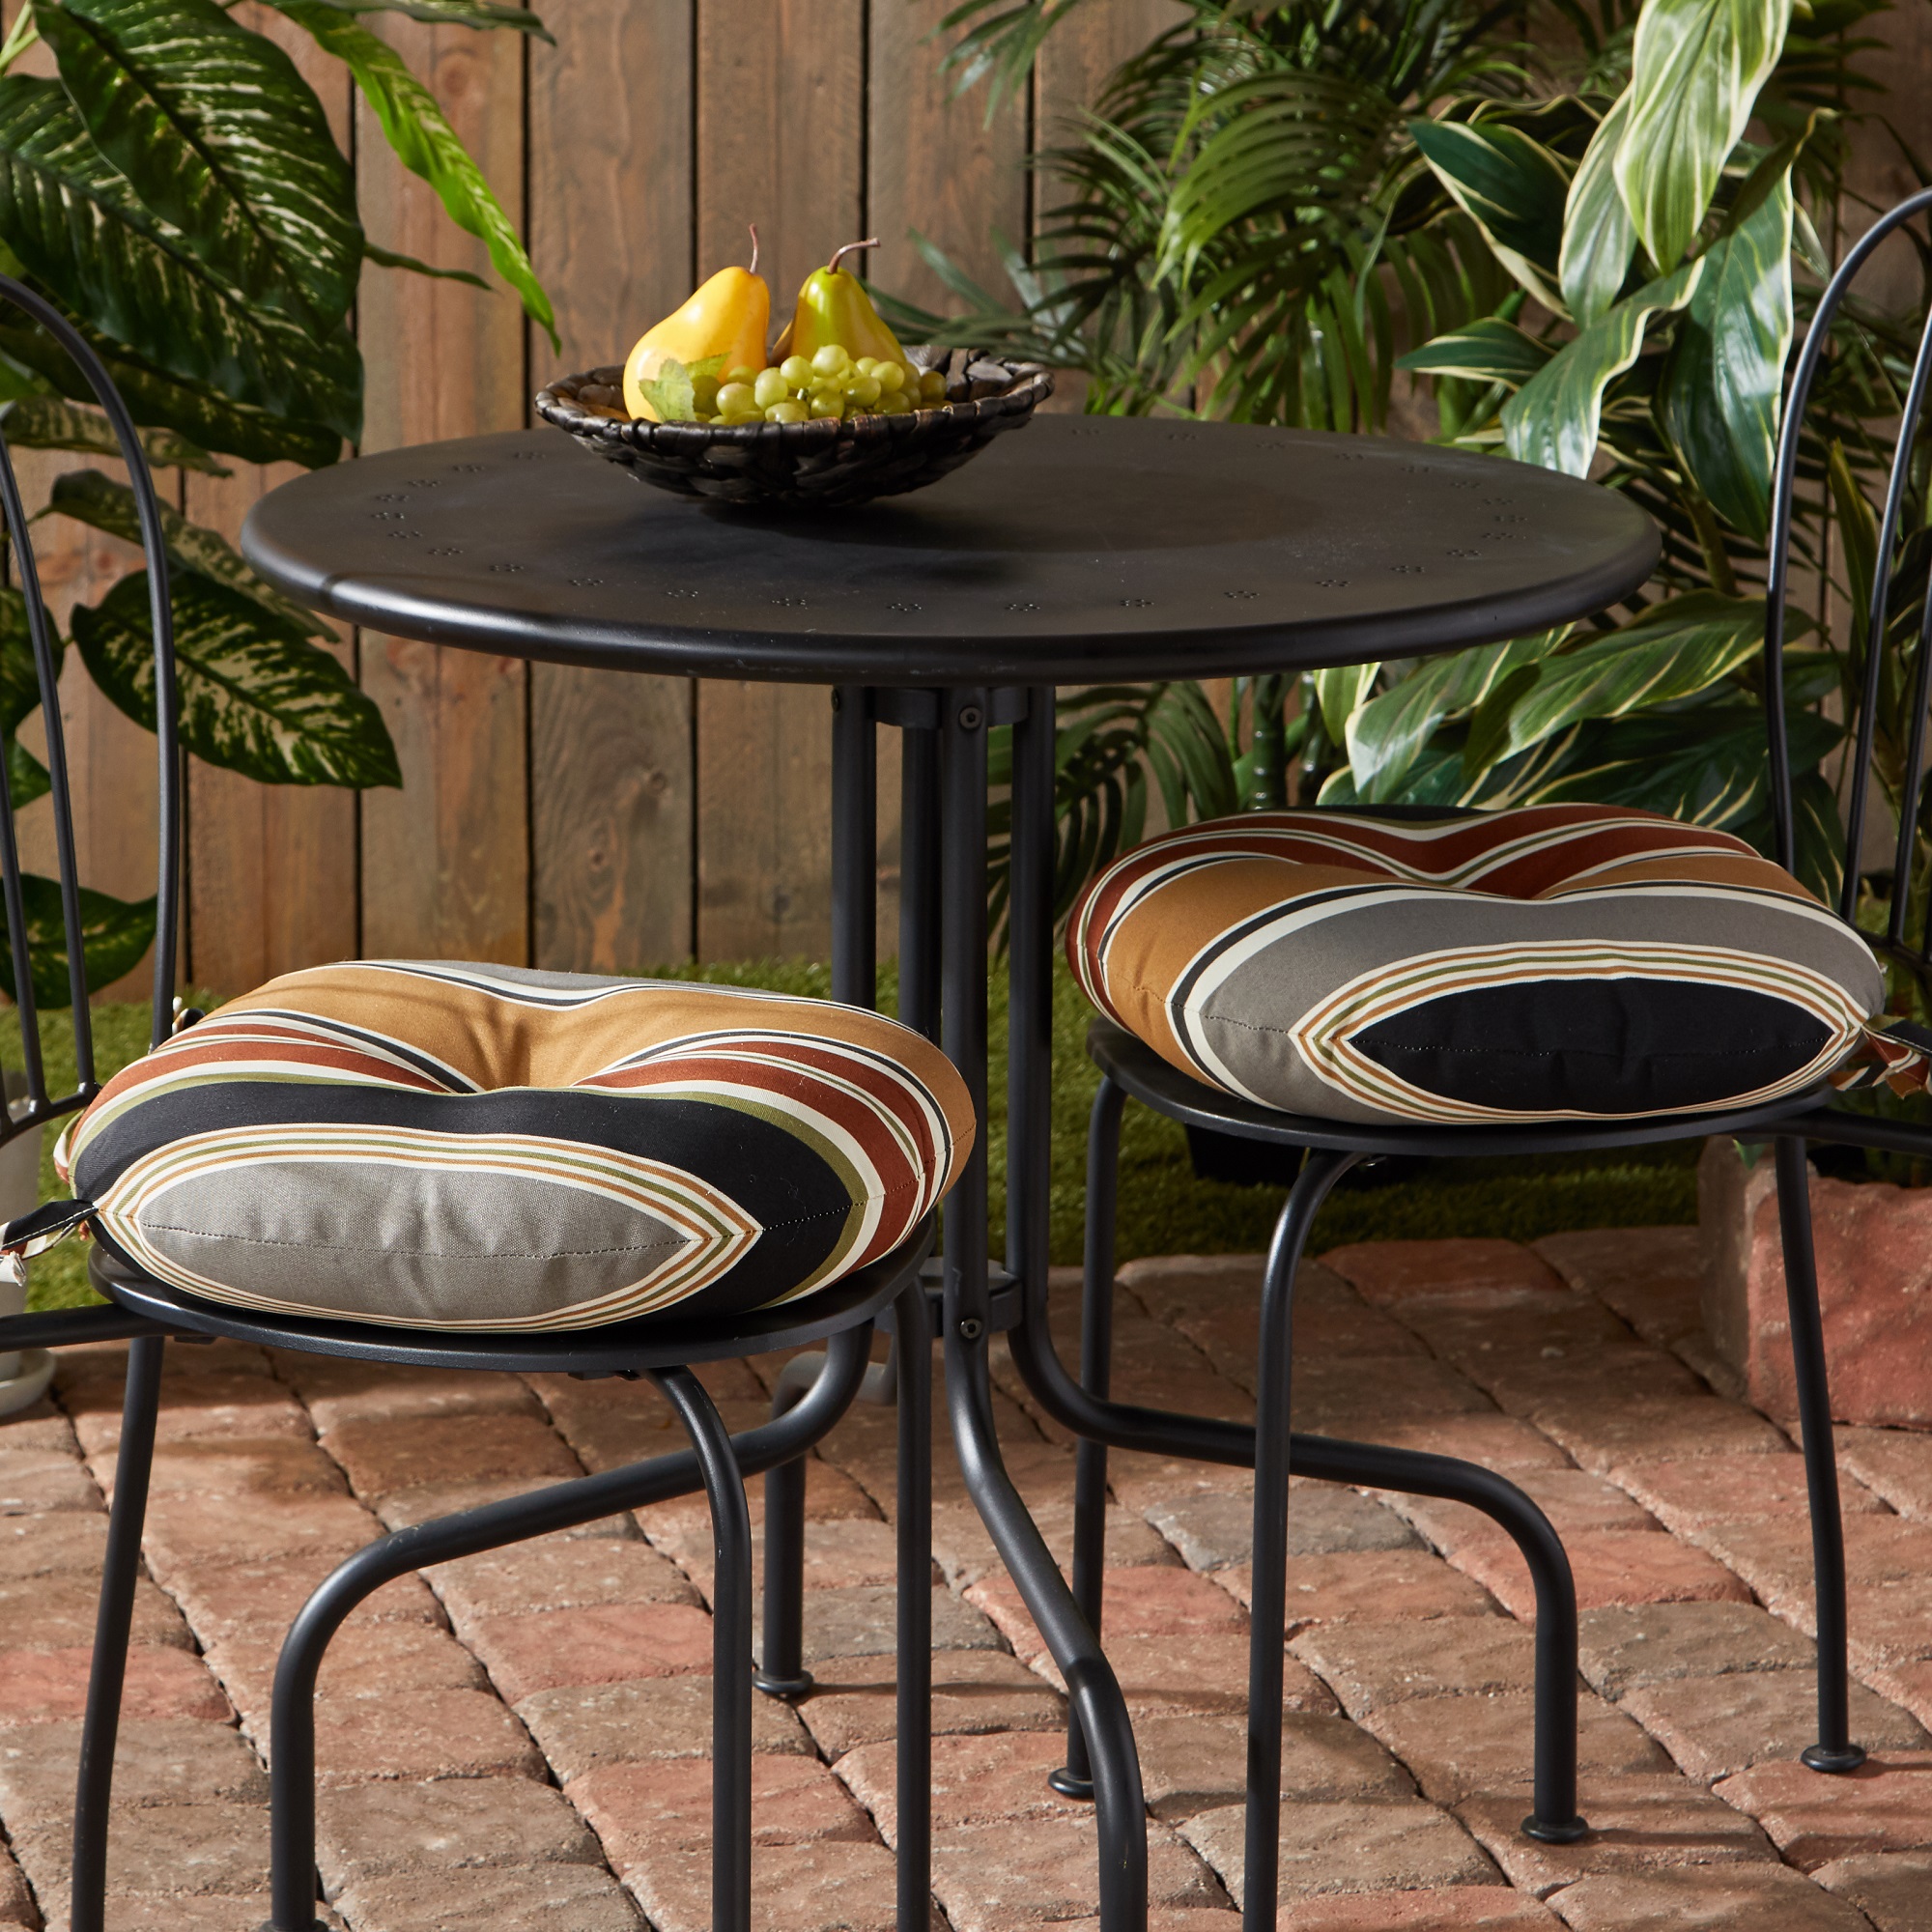 Greendale Home Fashions Brick Stripe 15 in. Round Outdoor Reversible Bistro Seat Cushion (Set of 2) - image 3 of 7